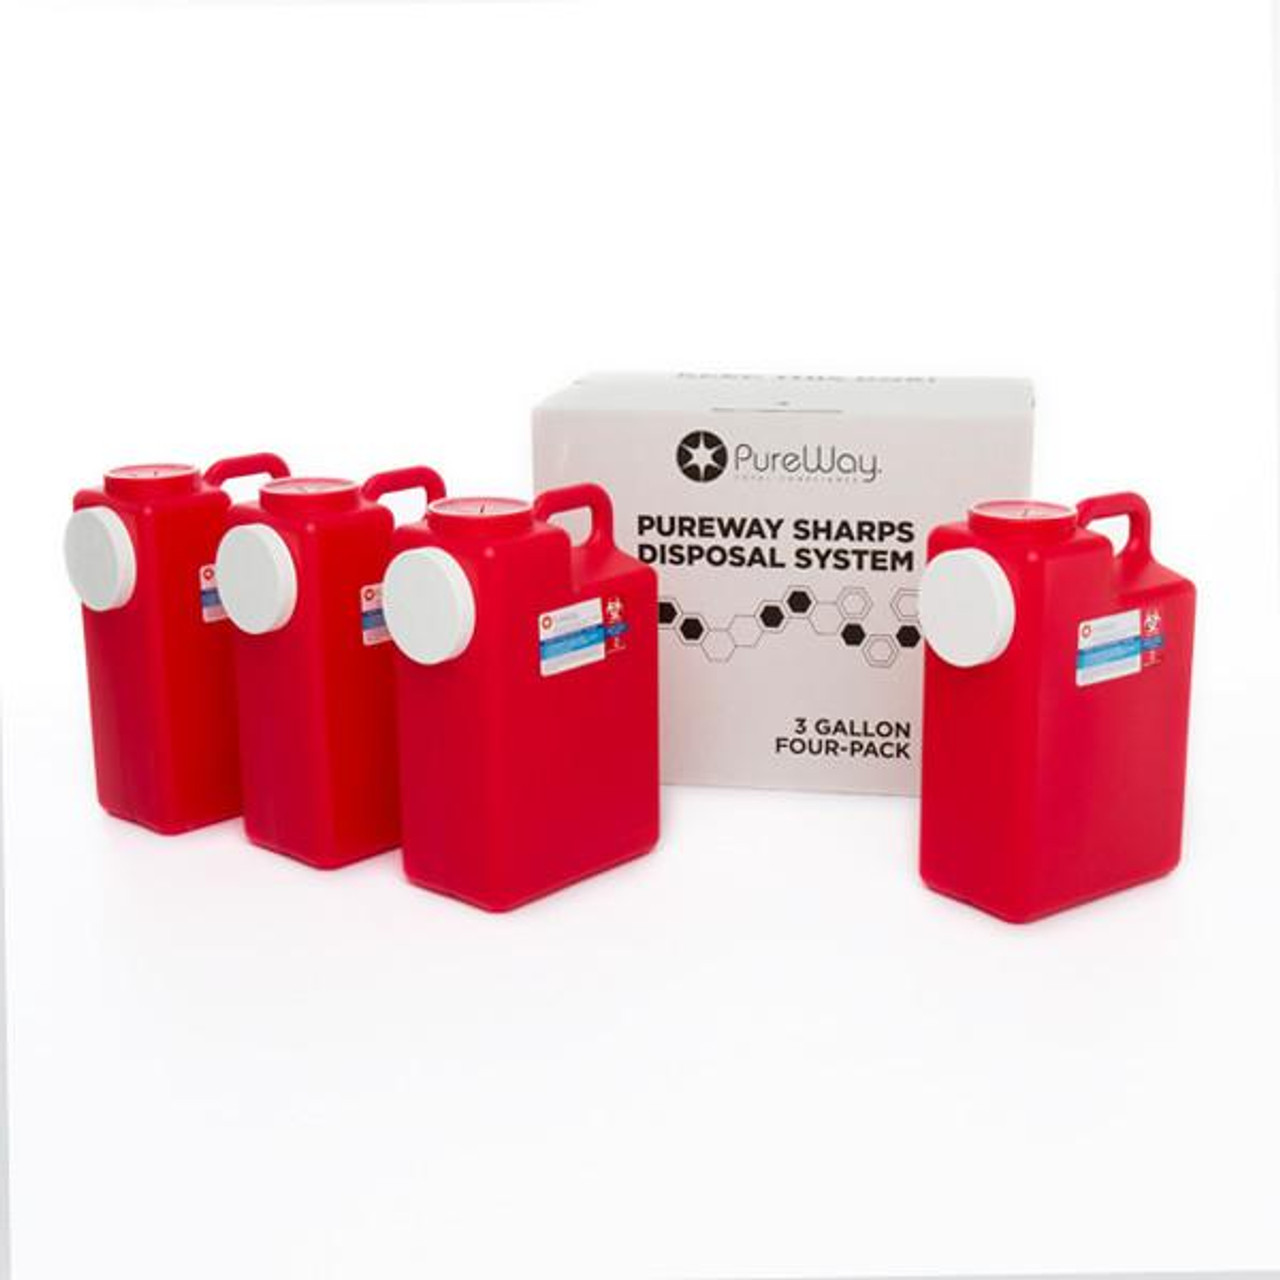 PureWay Sharps Disposal Multipack System, 4x3 Gallon Containers Return Prepaid